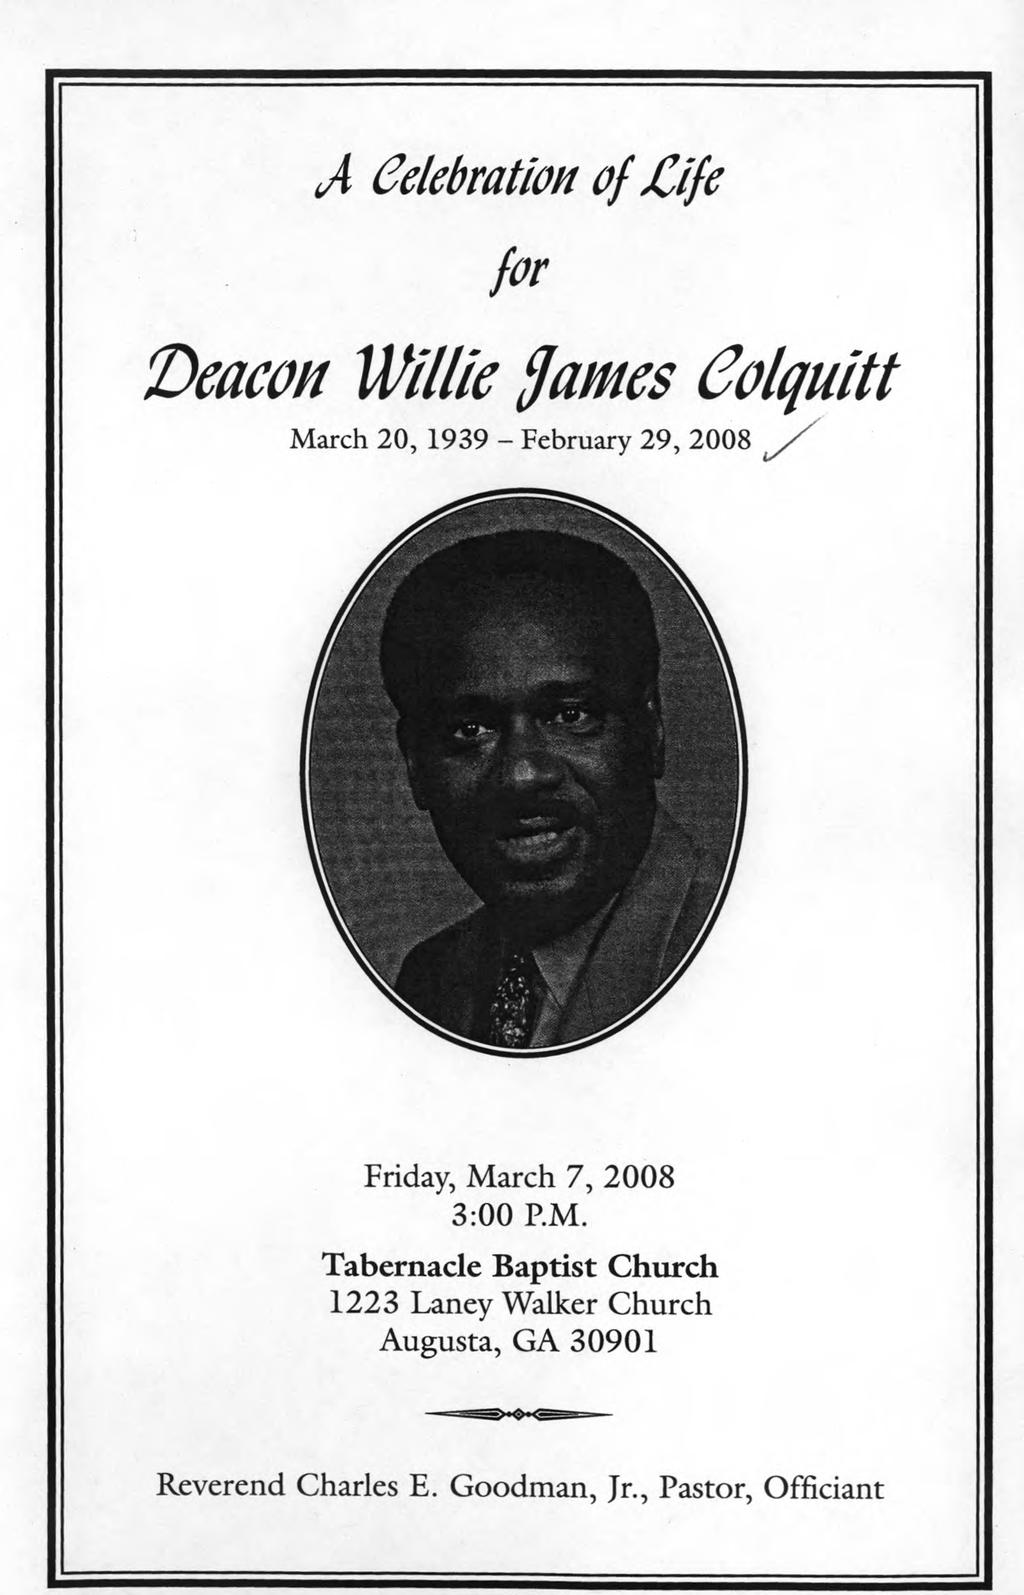 A Celebration of JCife for Deacon Willie fames Colquitt March 20, 1939 - February 29, 2008 / Friday, March 7, 2008 3:00 P.